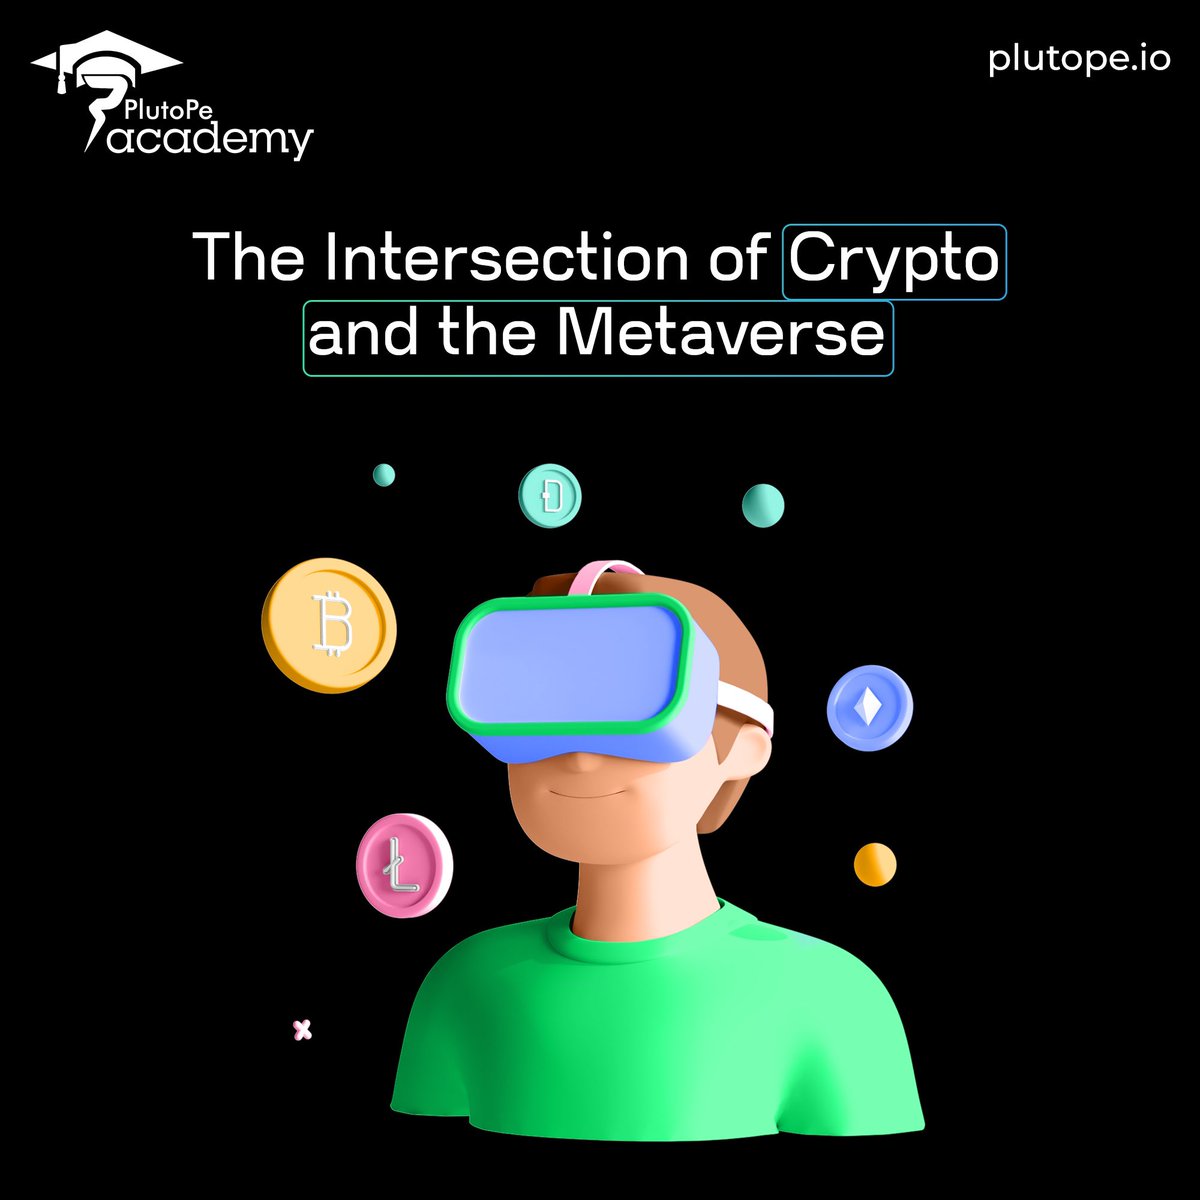 Magic Money in Make-Believe Worlds! Remember GPay & Paytm? Now imagine 'magic internet money'in a cool online world called the 'metaverse' !That's the Crypto & Metaverse Mix: 🤔Think: Metaverse is like a giant online playground with games, shops, even houses! Crypto is like